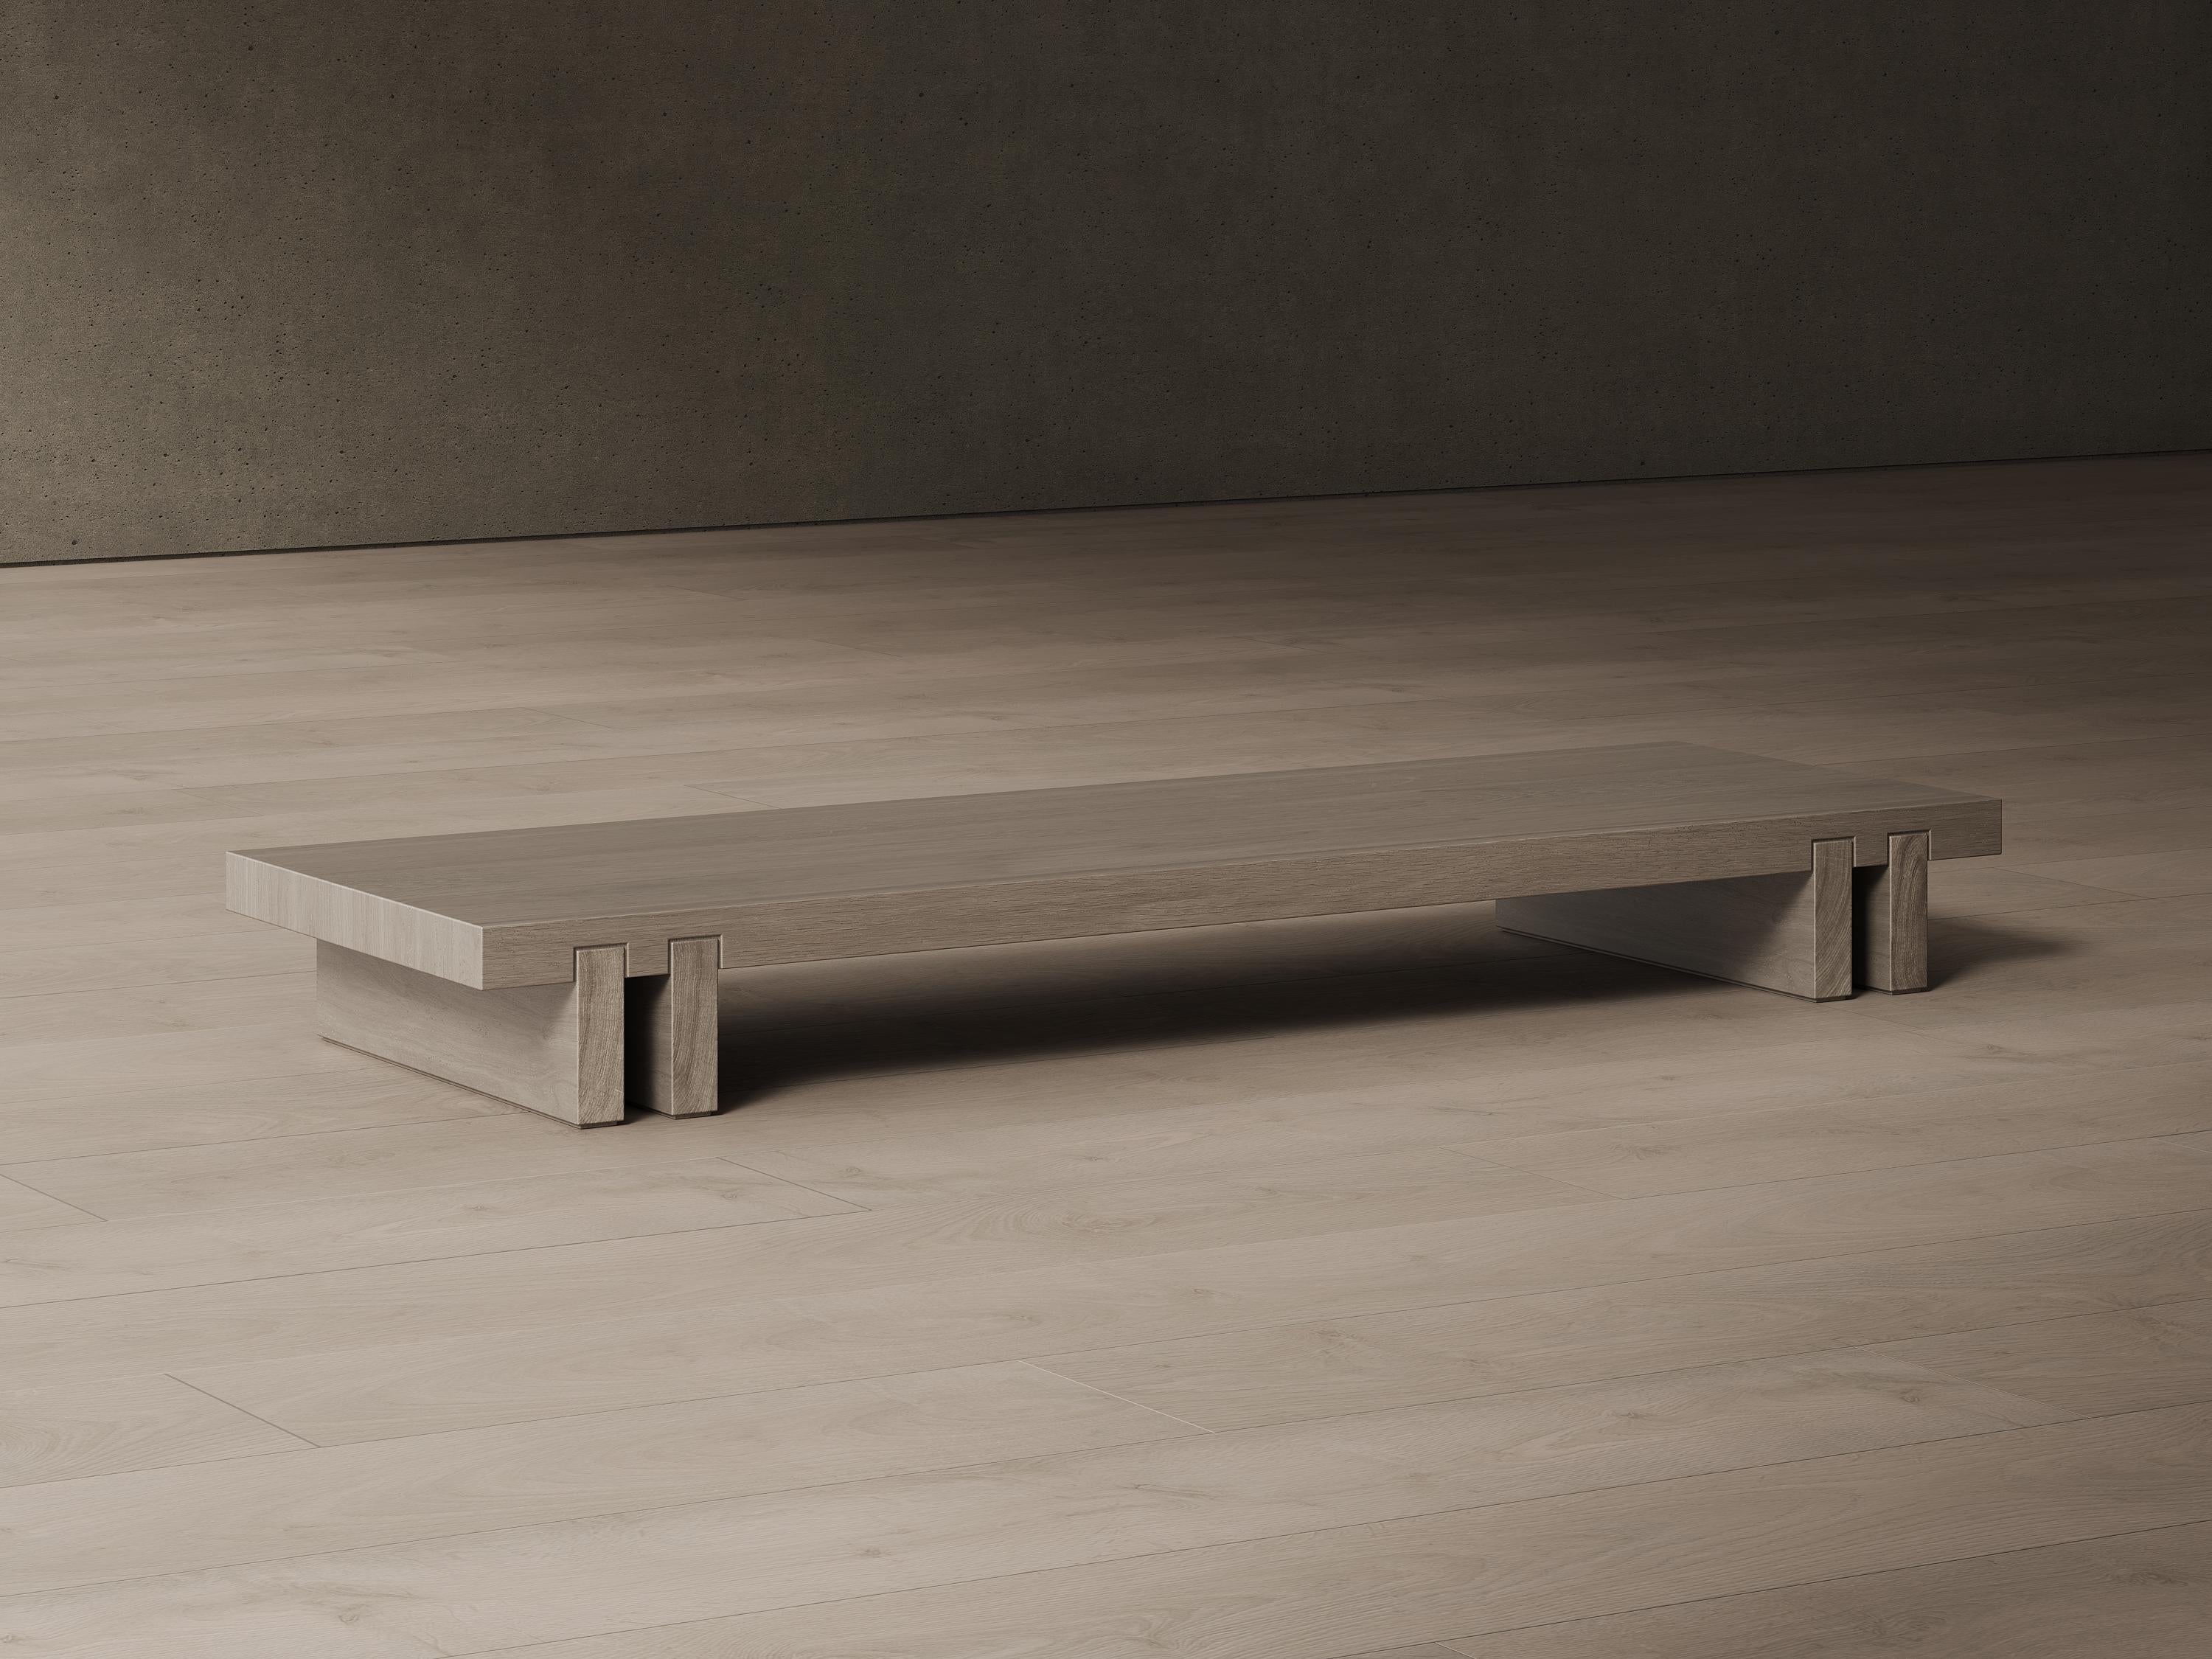 Drawing inspiration from Japanese minimalism, the Intersekt collection elevates its design with a harmonious blend of symmetrical and linear features. The table in its wooden version of this collection, is available in a refined shade of grey oak,